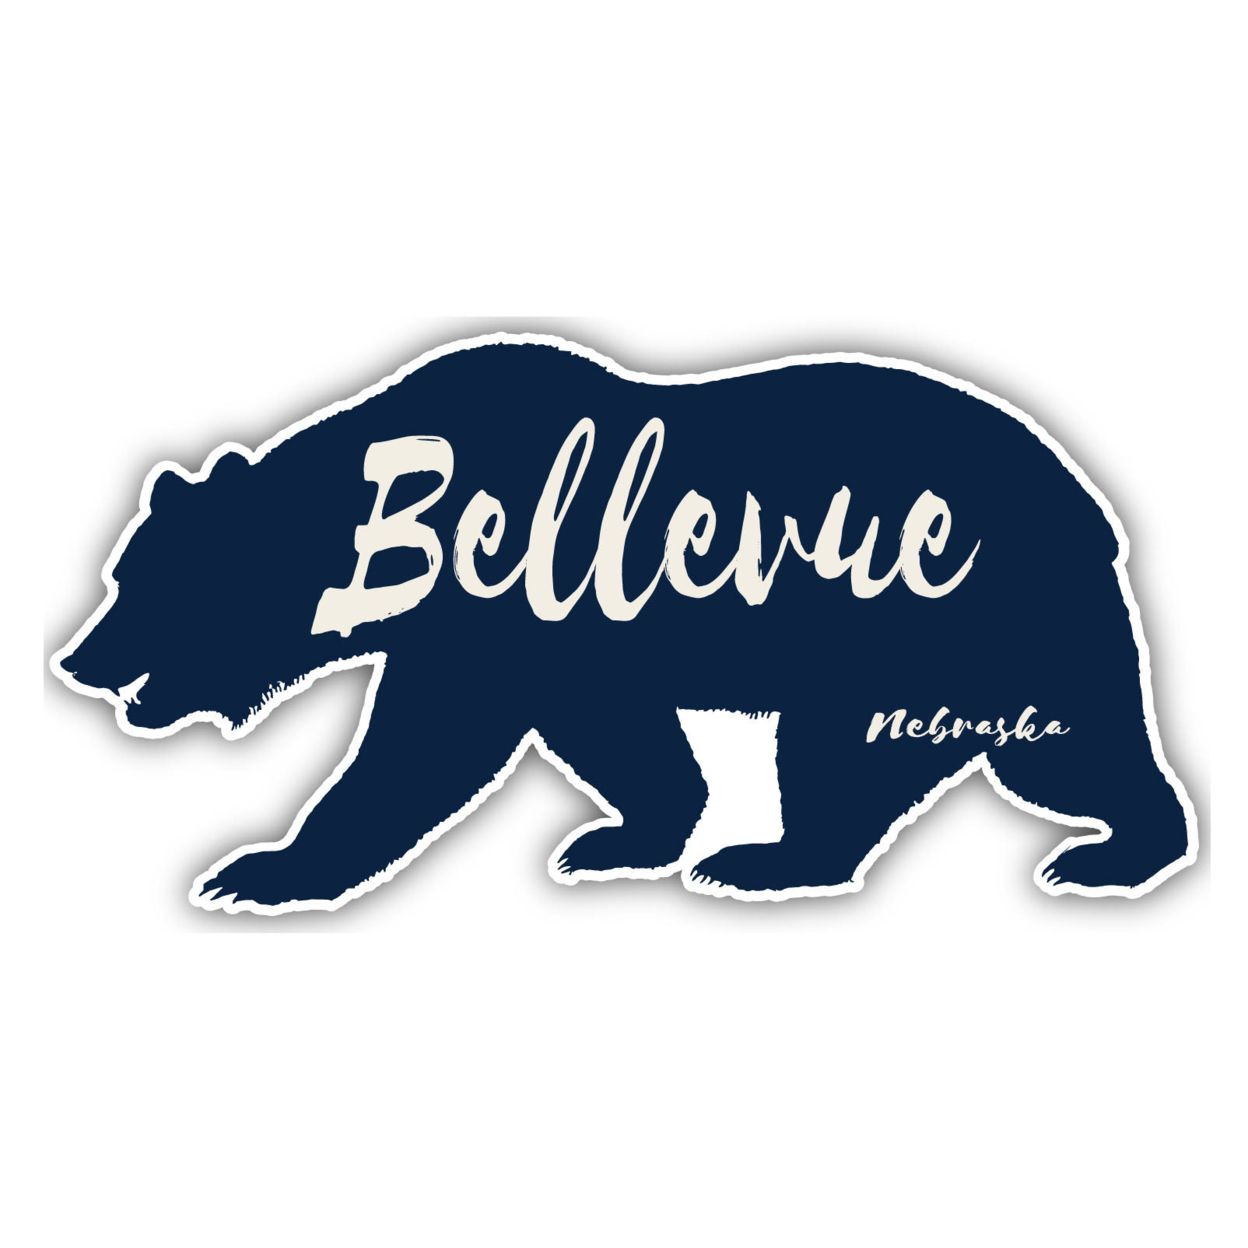 Bellevue Nebraska Souvenir Decorative Stickers (Choose Theme And Size) - 4-Pack, 2-Inch, Great Outdoors